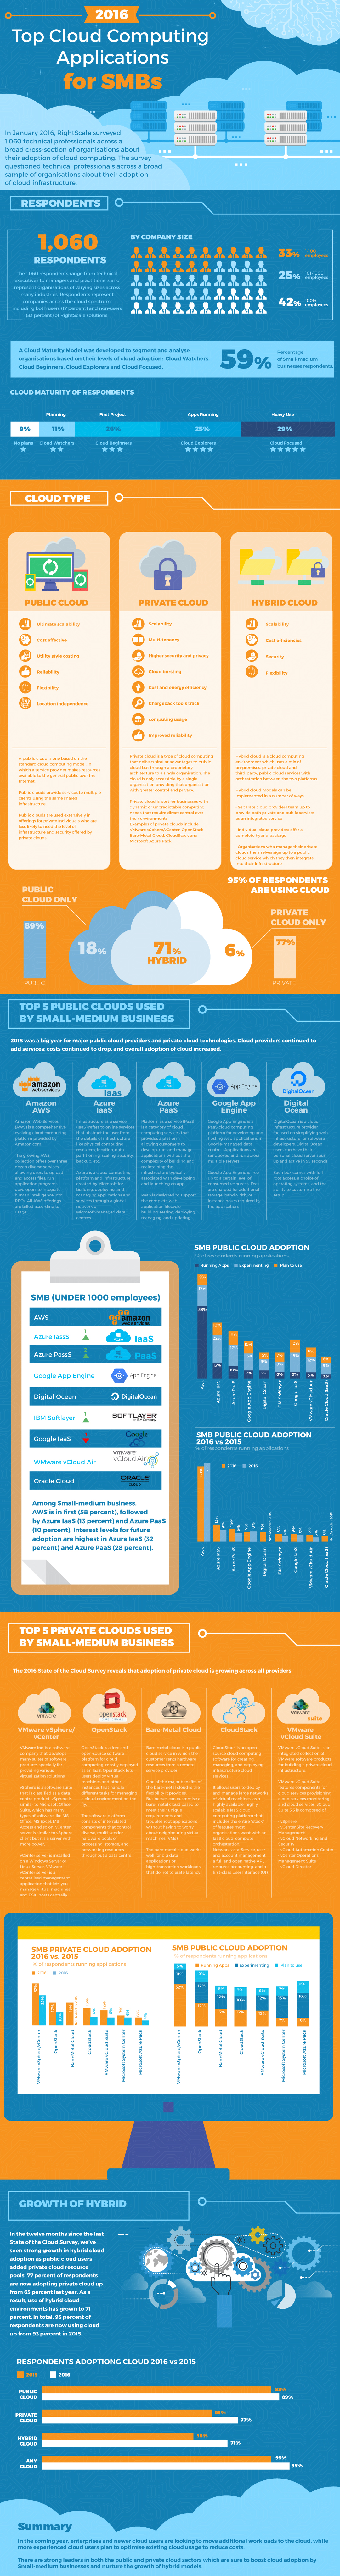 Top Cloud Computing Applications 2016 Infographic